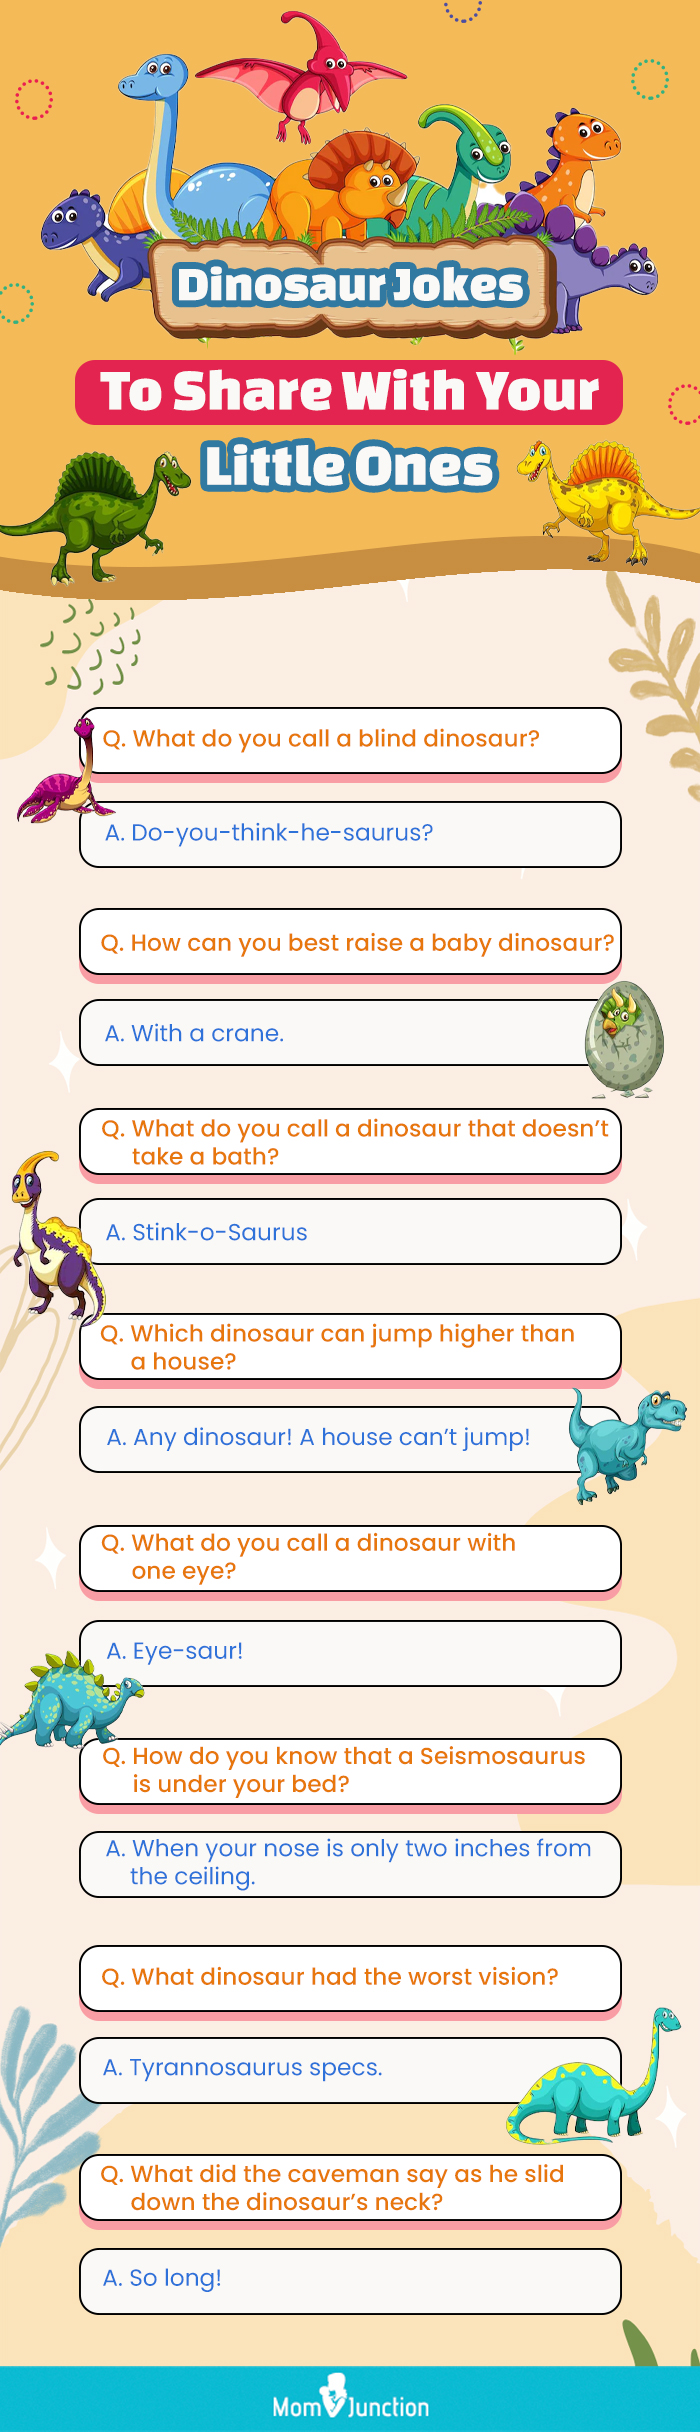 dinosaur jokes to share with your little ones (infographic)